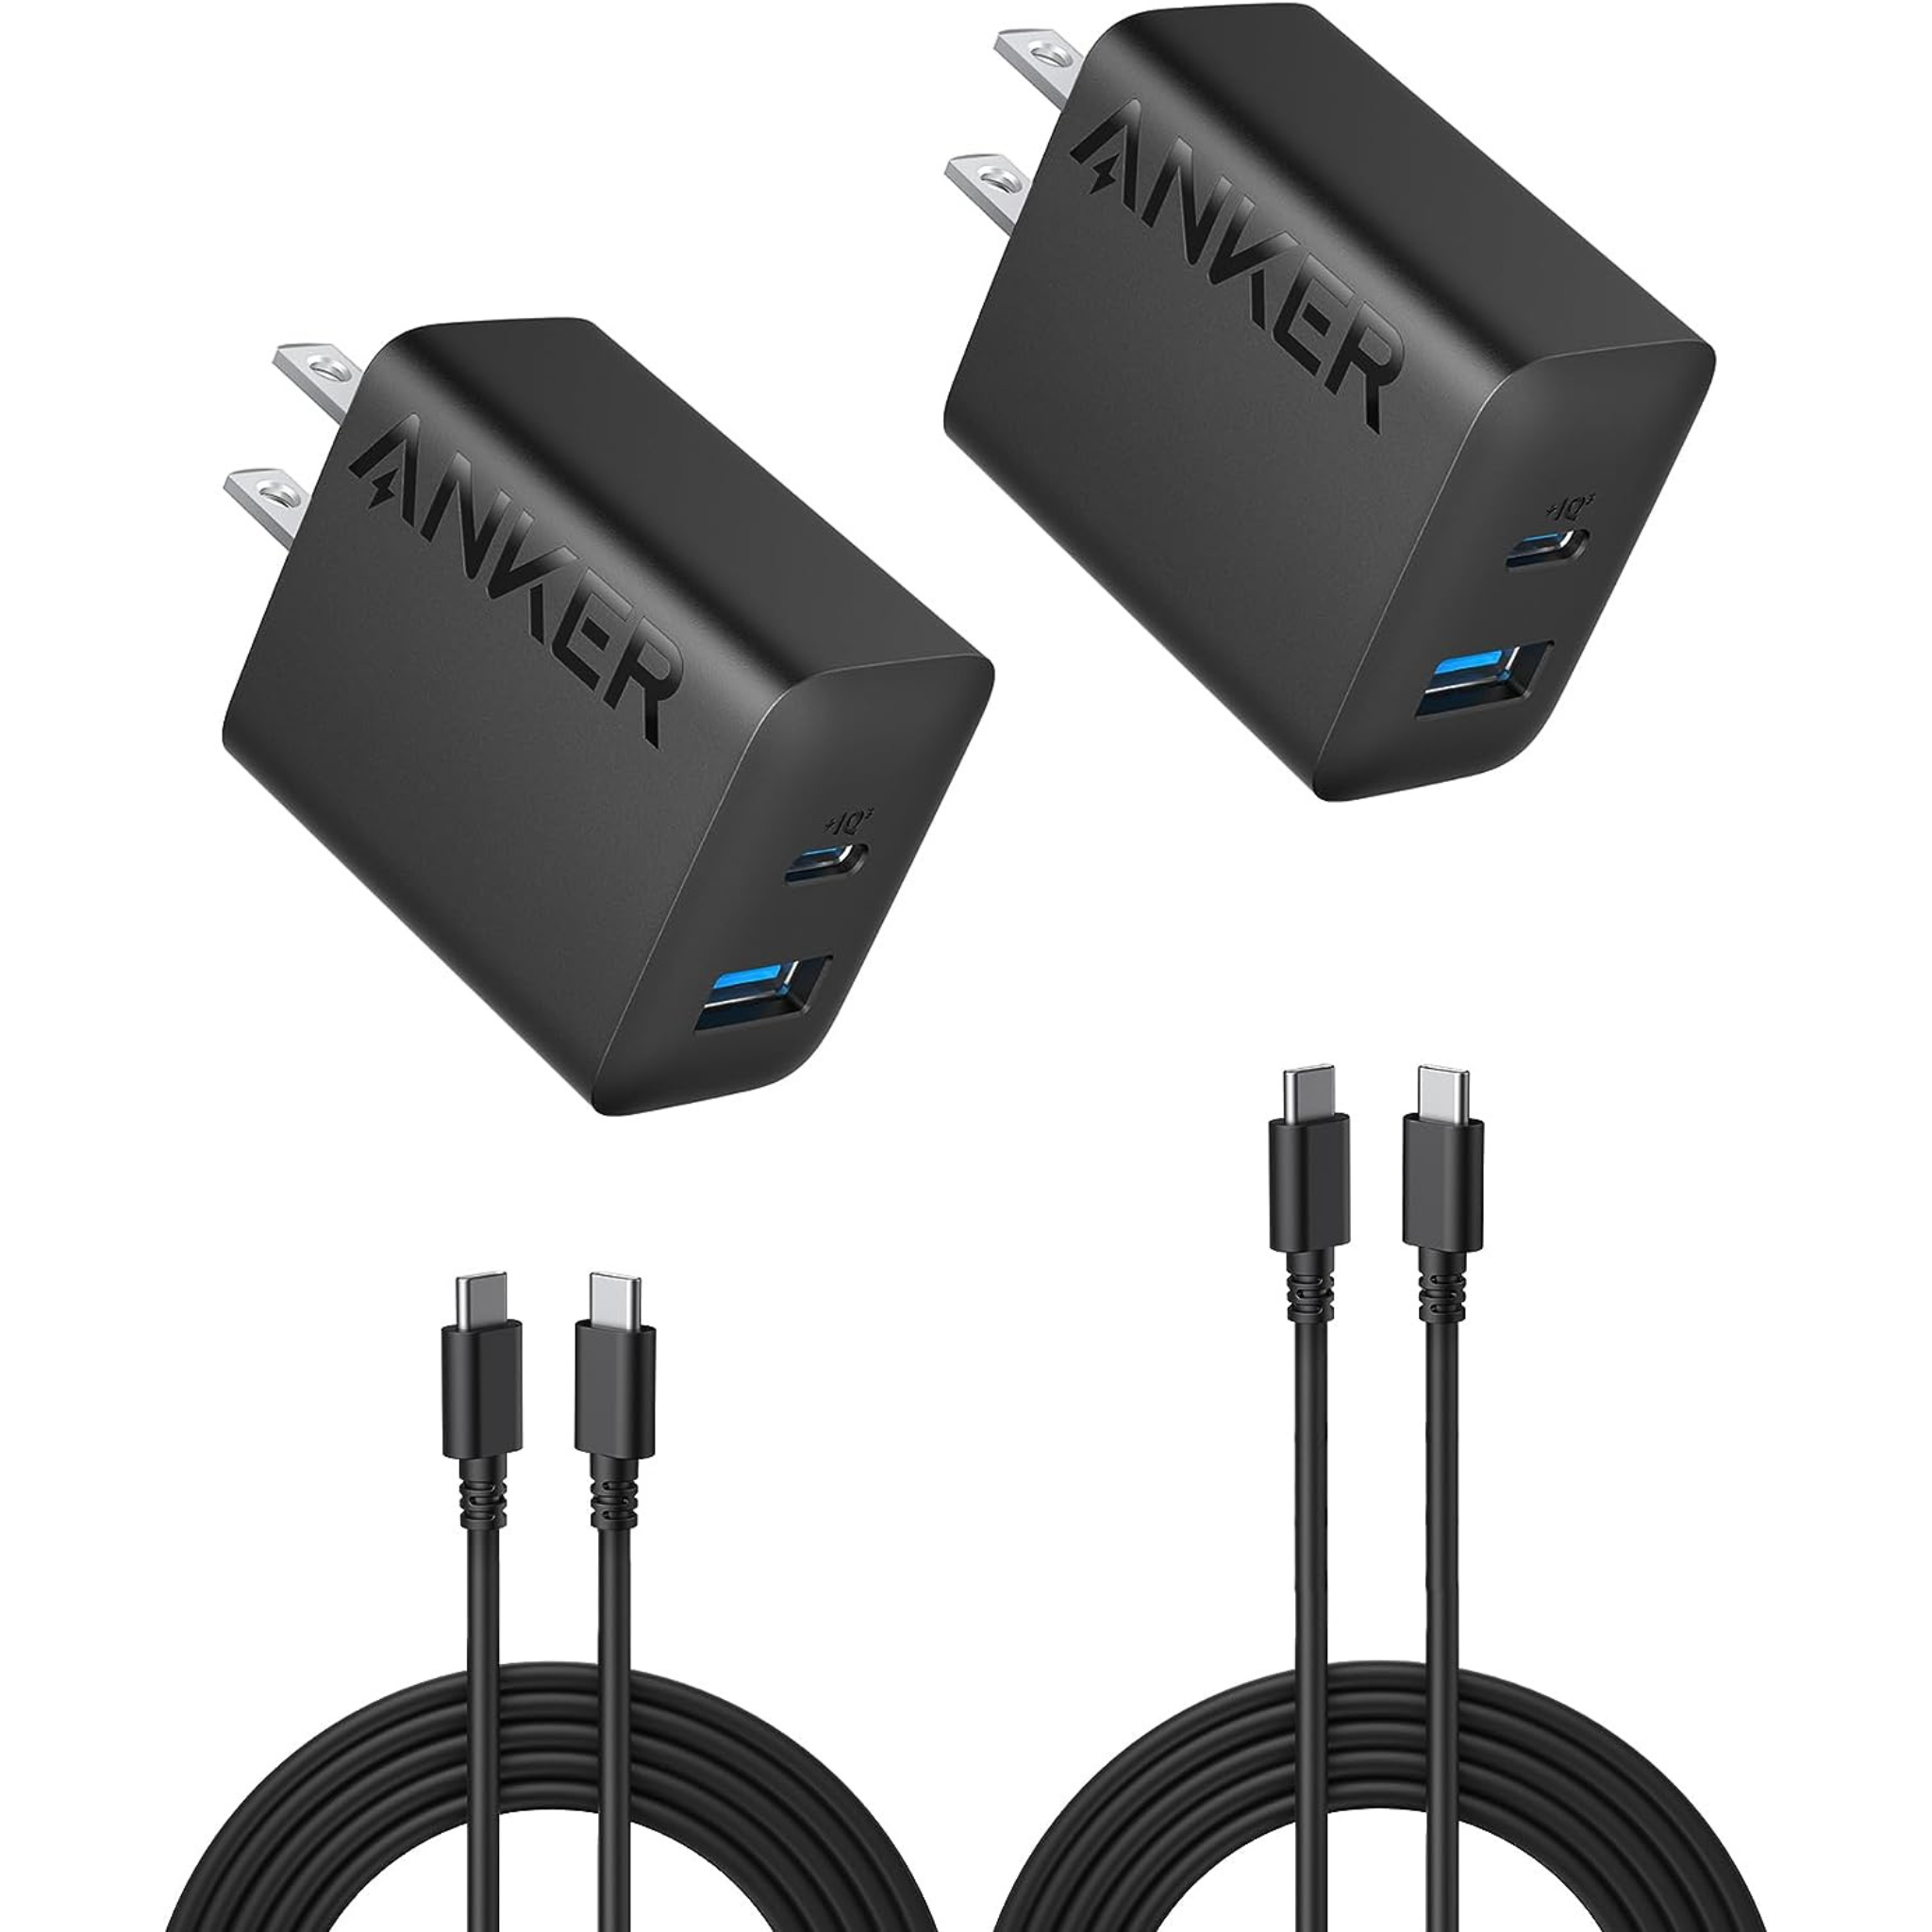 Set Of Anker USB C Chargers With Two 20W Dual Port USB Fast Wall Chargers And Two 5′ USB C Cables